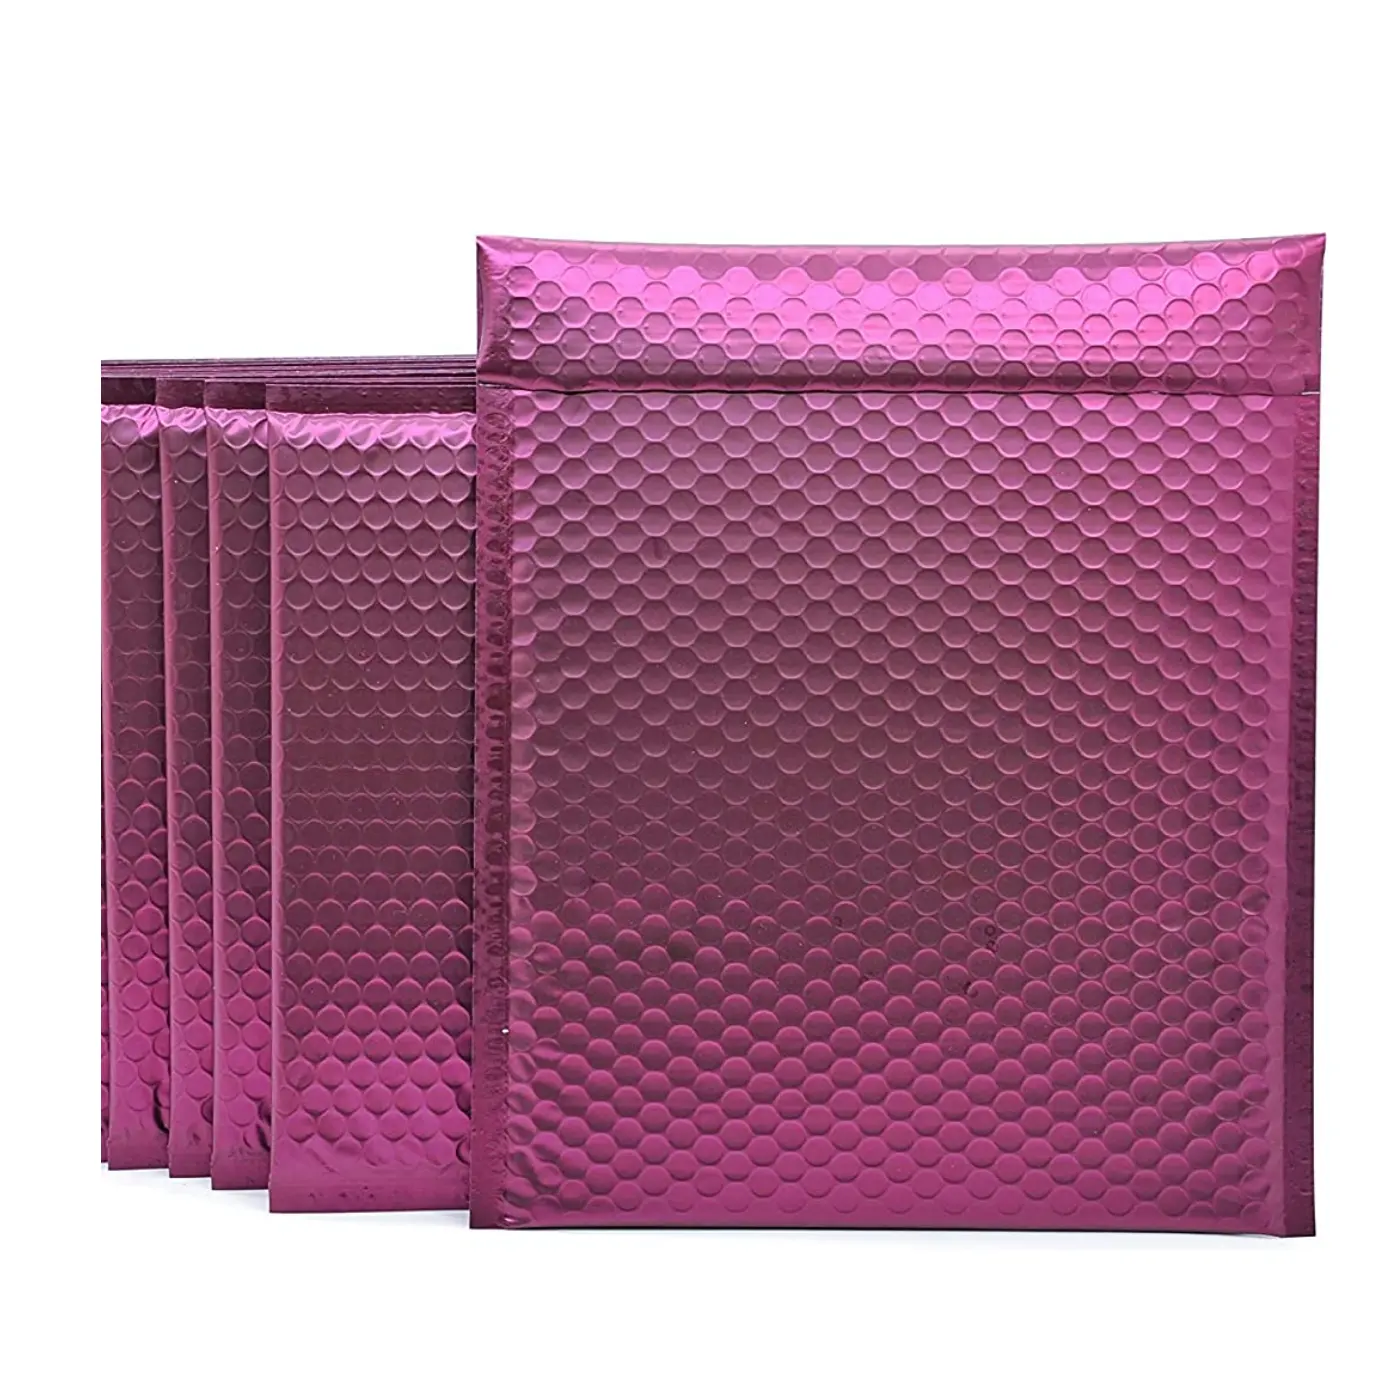 CTCX Aluminum Insulated Bubble Mailing Foil Mailers Bubble Padded Envelopes Custom Hot Pink Metallic Bubble/Buble Mailer